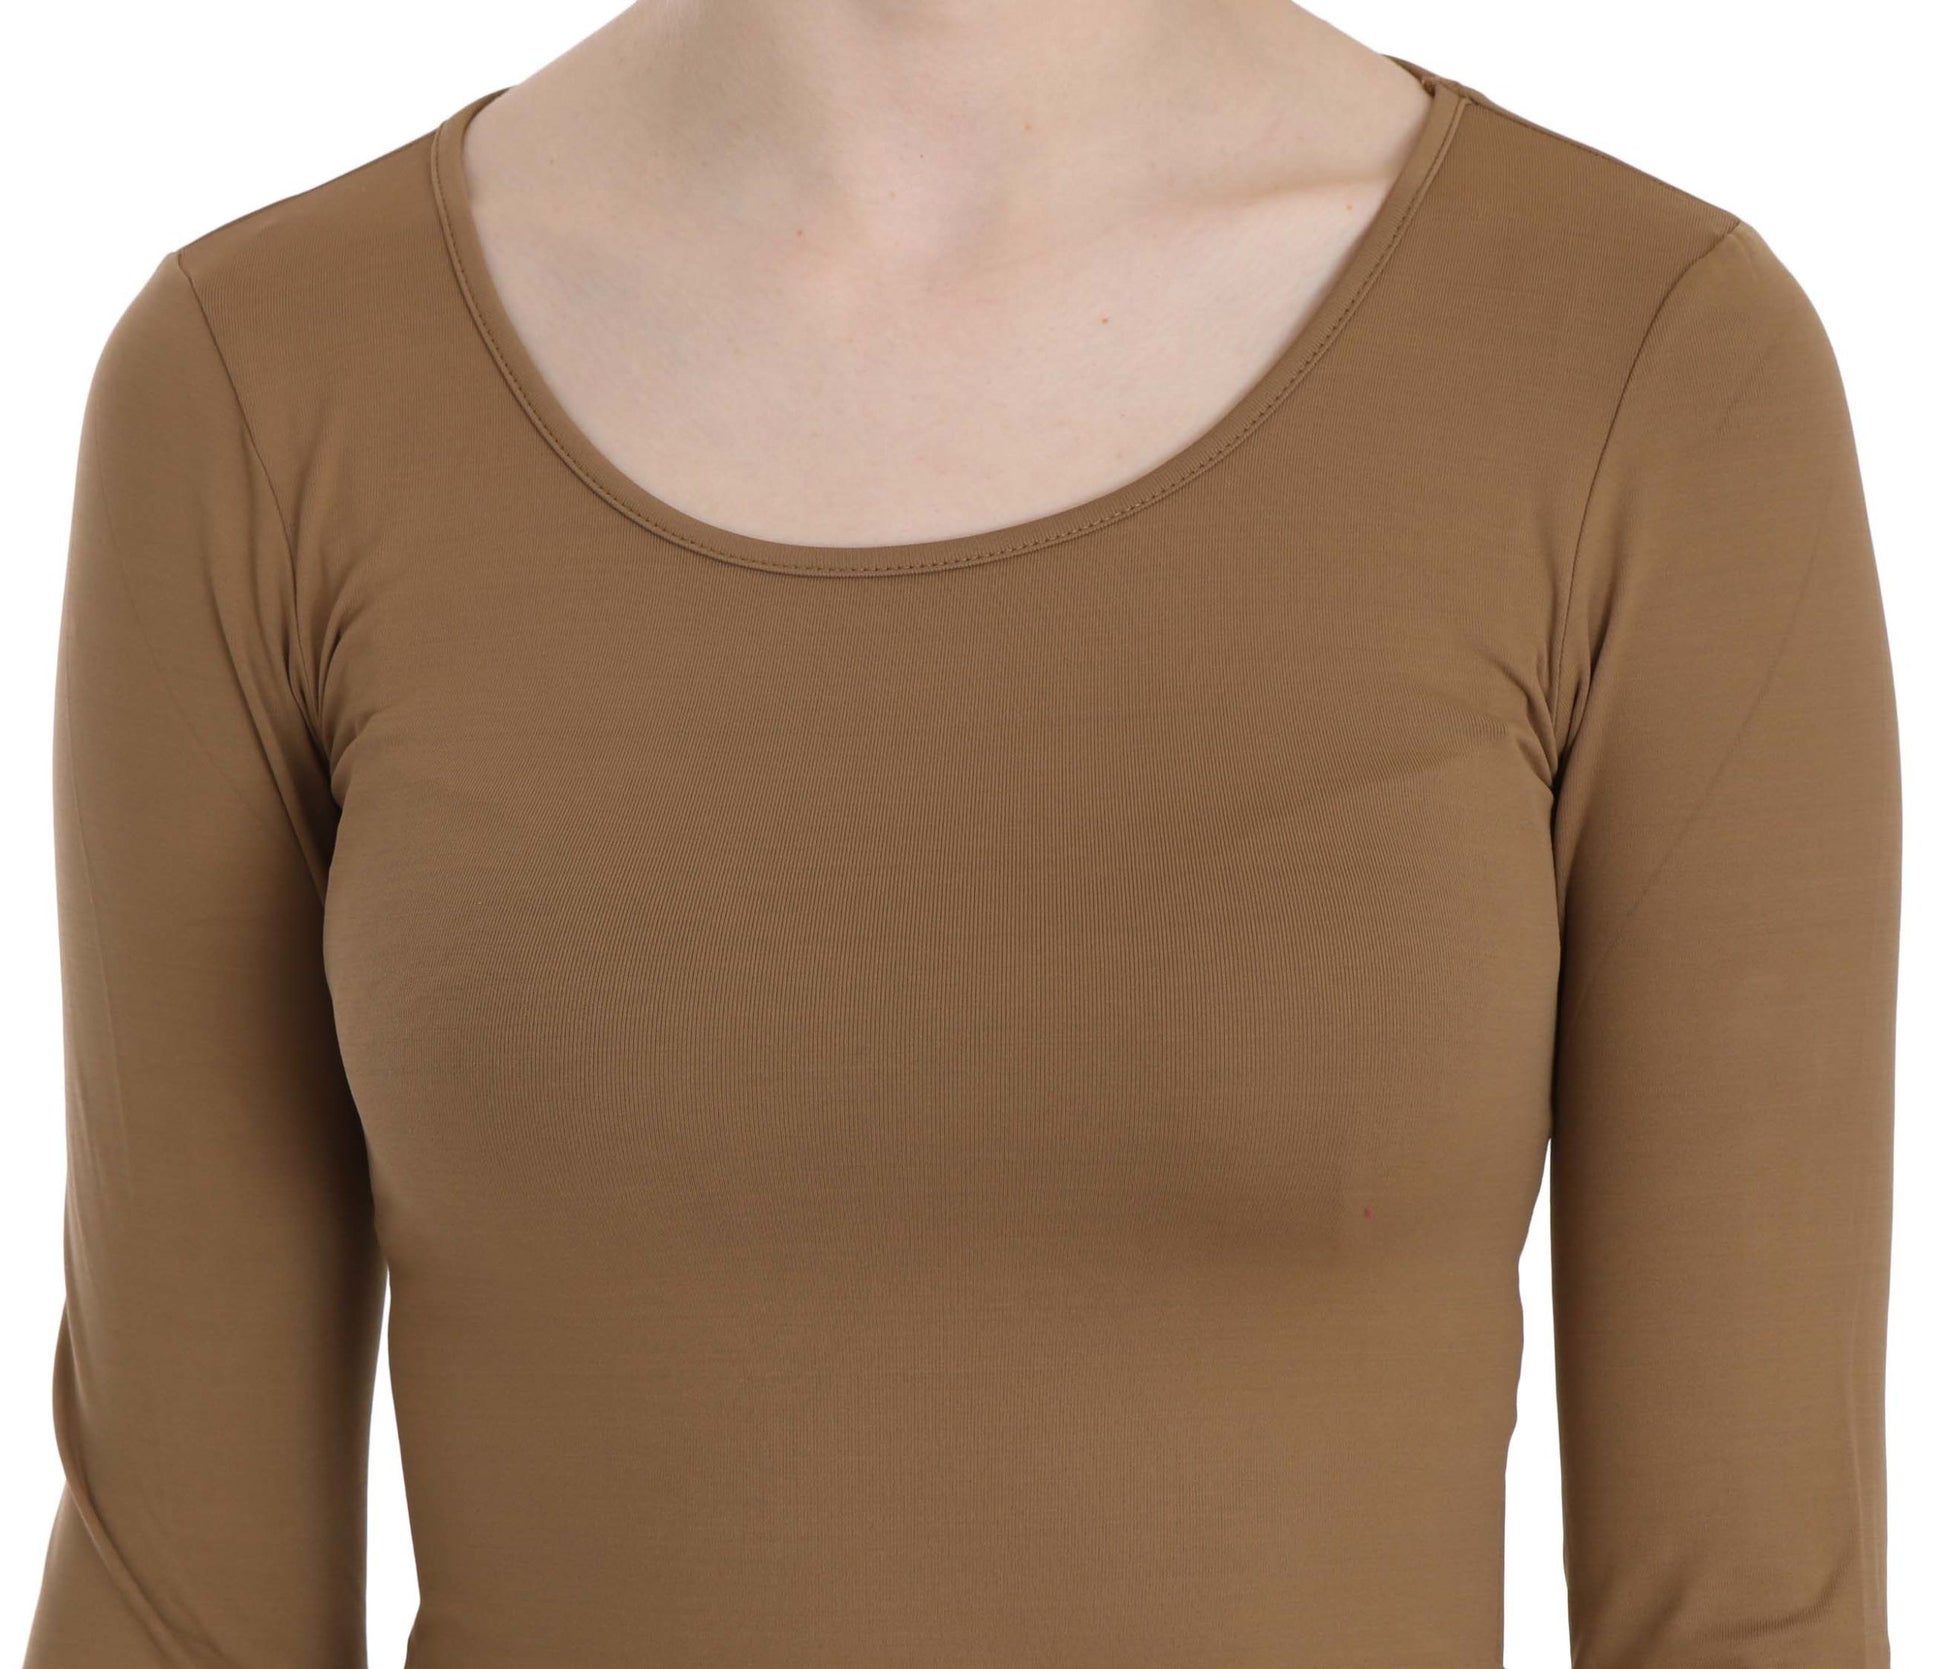 Brown Long Round Neck Sleeve Fitted Shirt Tops Blouse - Designed by GF Ferre Available to Buy at a Discounted Price on Moon Behind The Hill Online Designer Discount Store